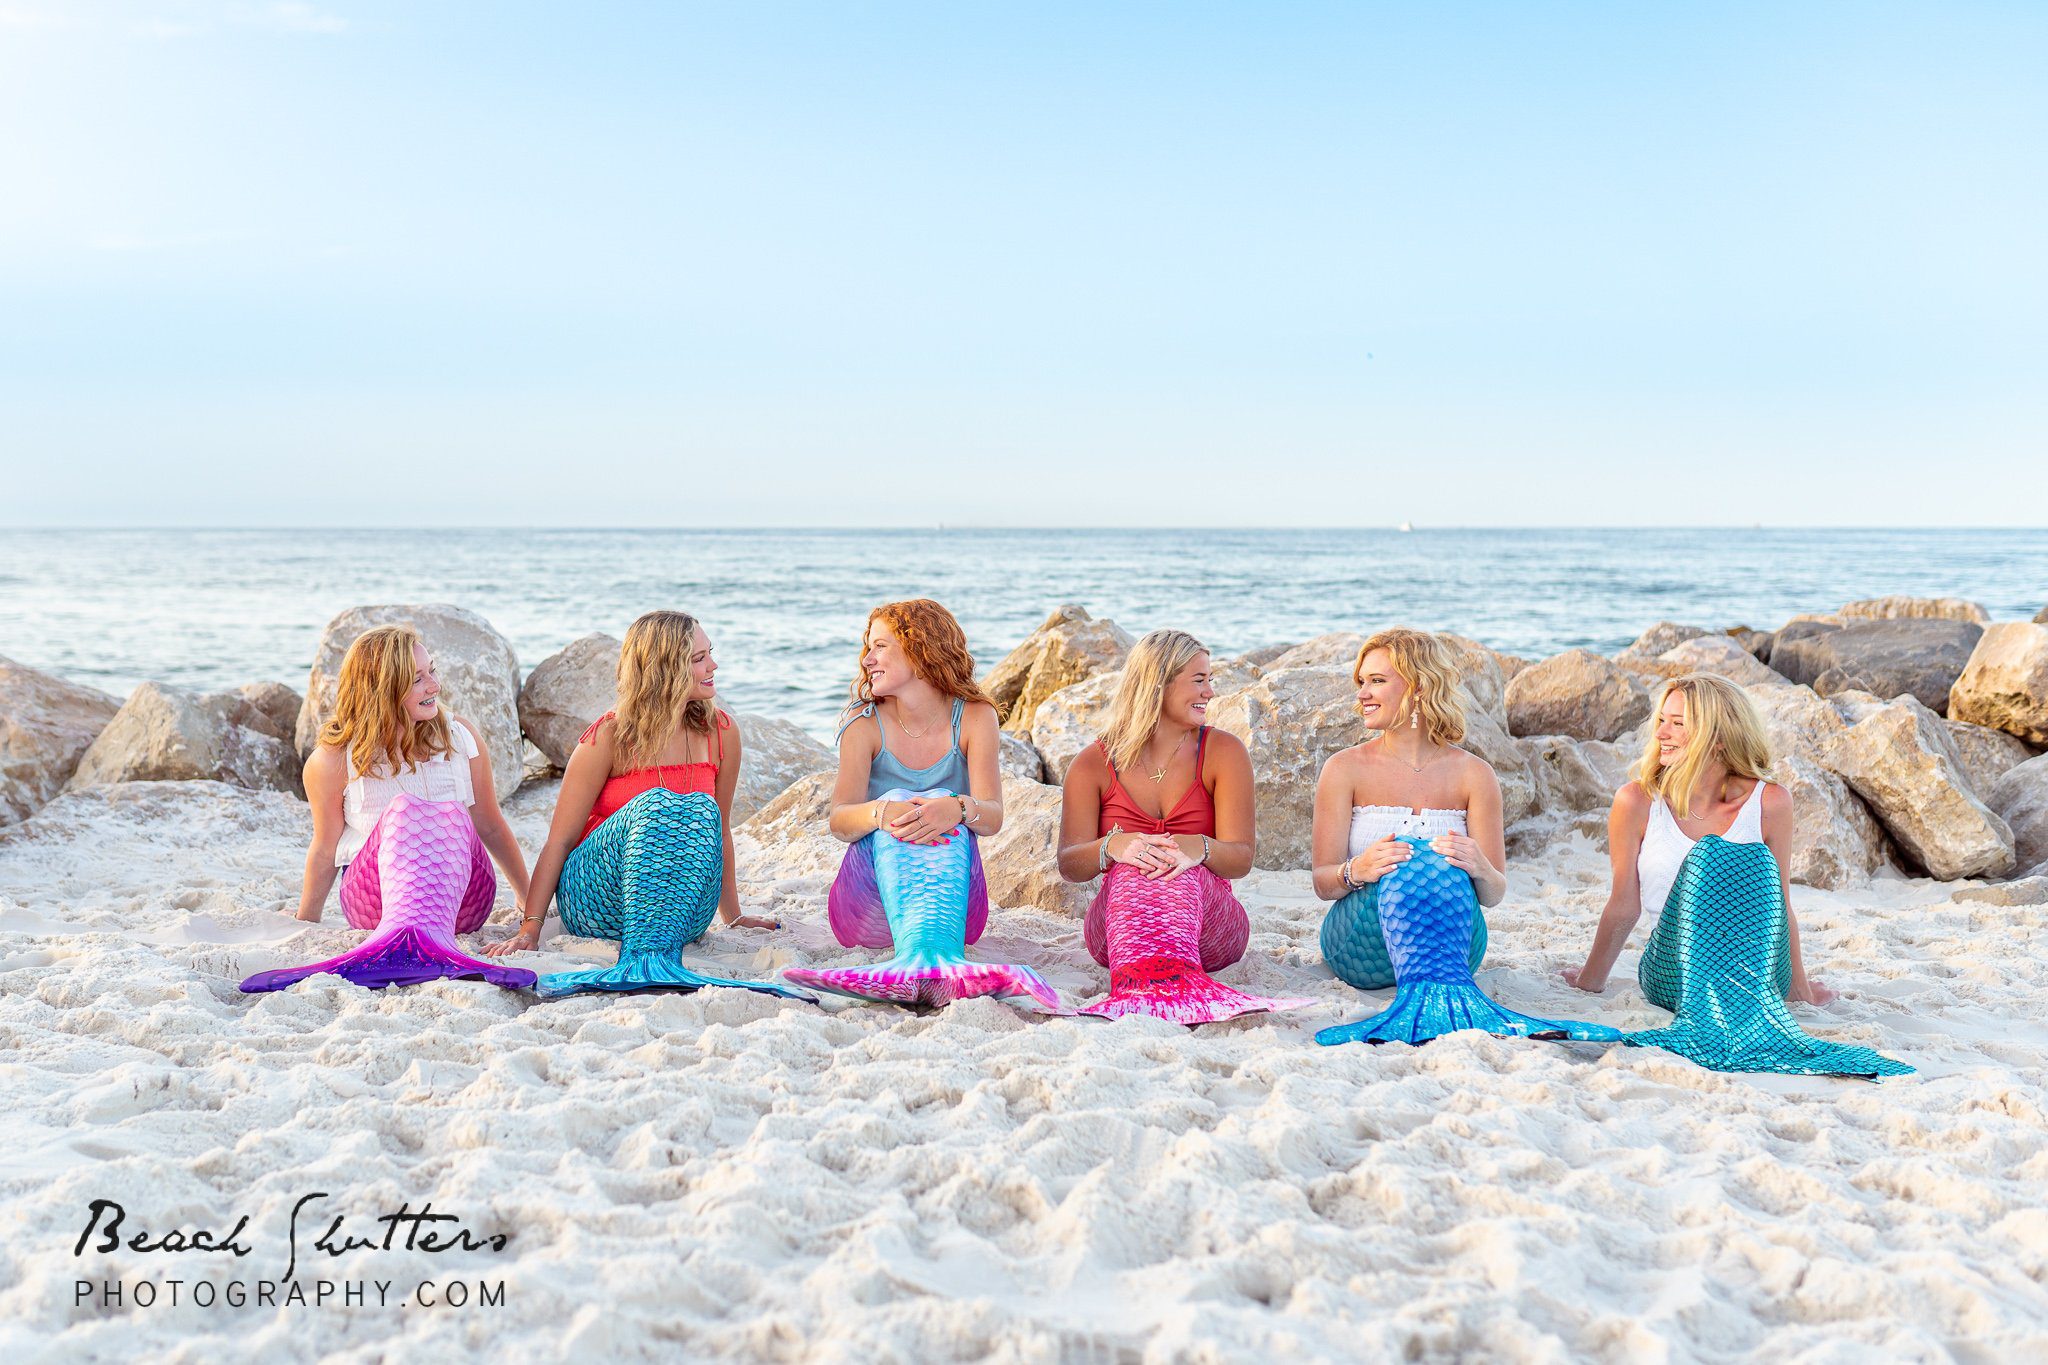 Beach Shutters Photography in Gulf Shores